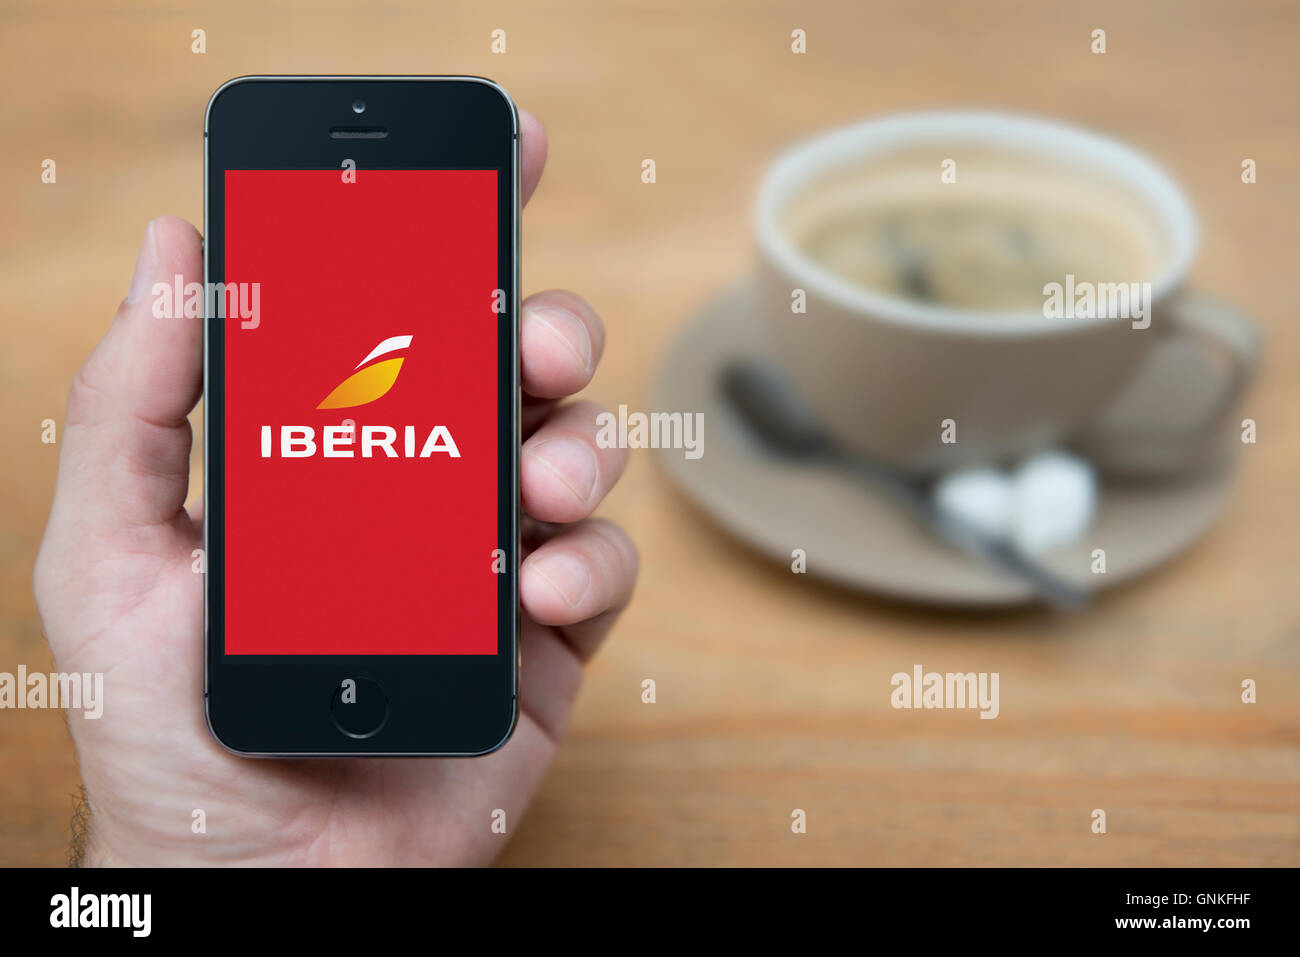 A man looks at his iPhone which displays the Iberia airline logo, while sat with a cup of coffee (Editorial use only). Stock Photo